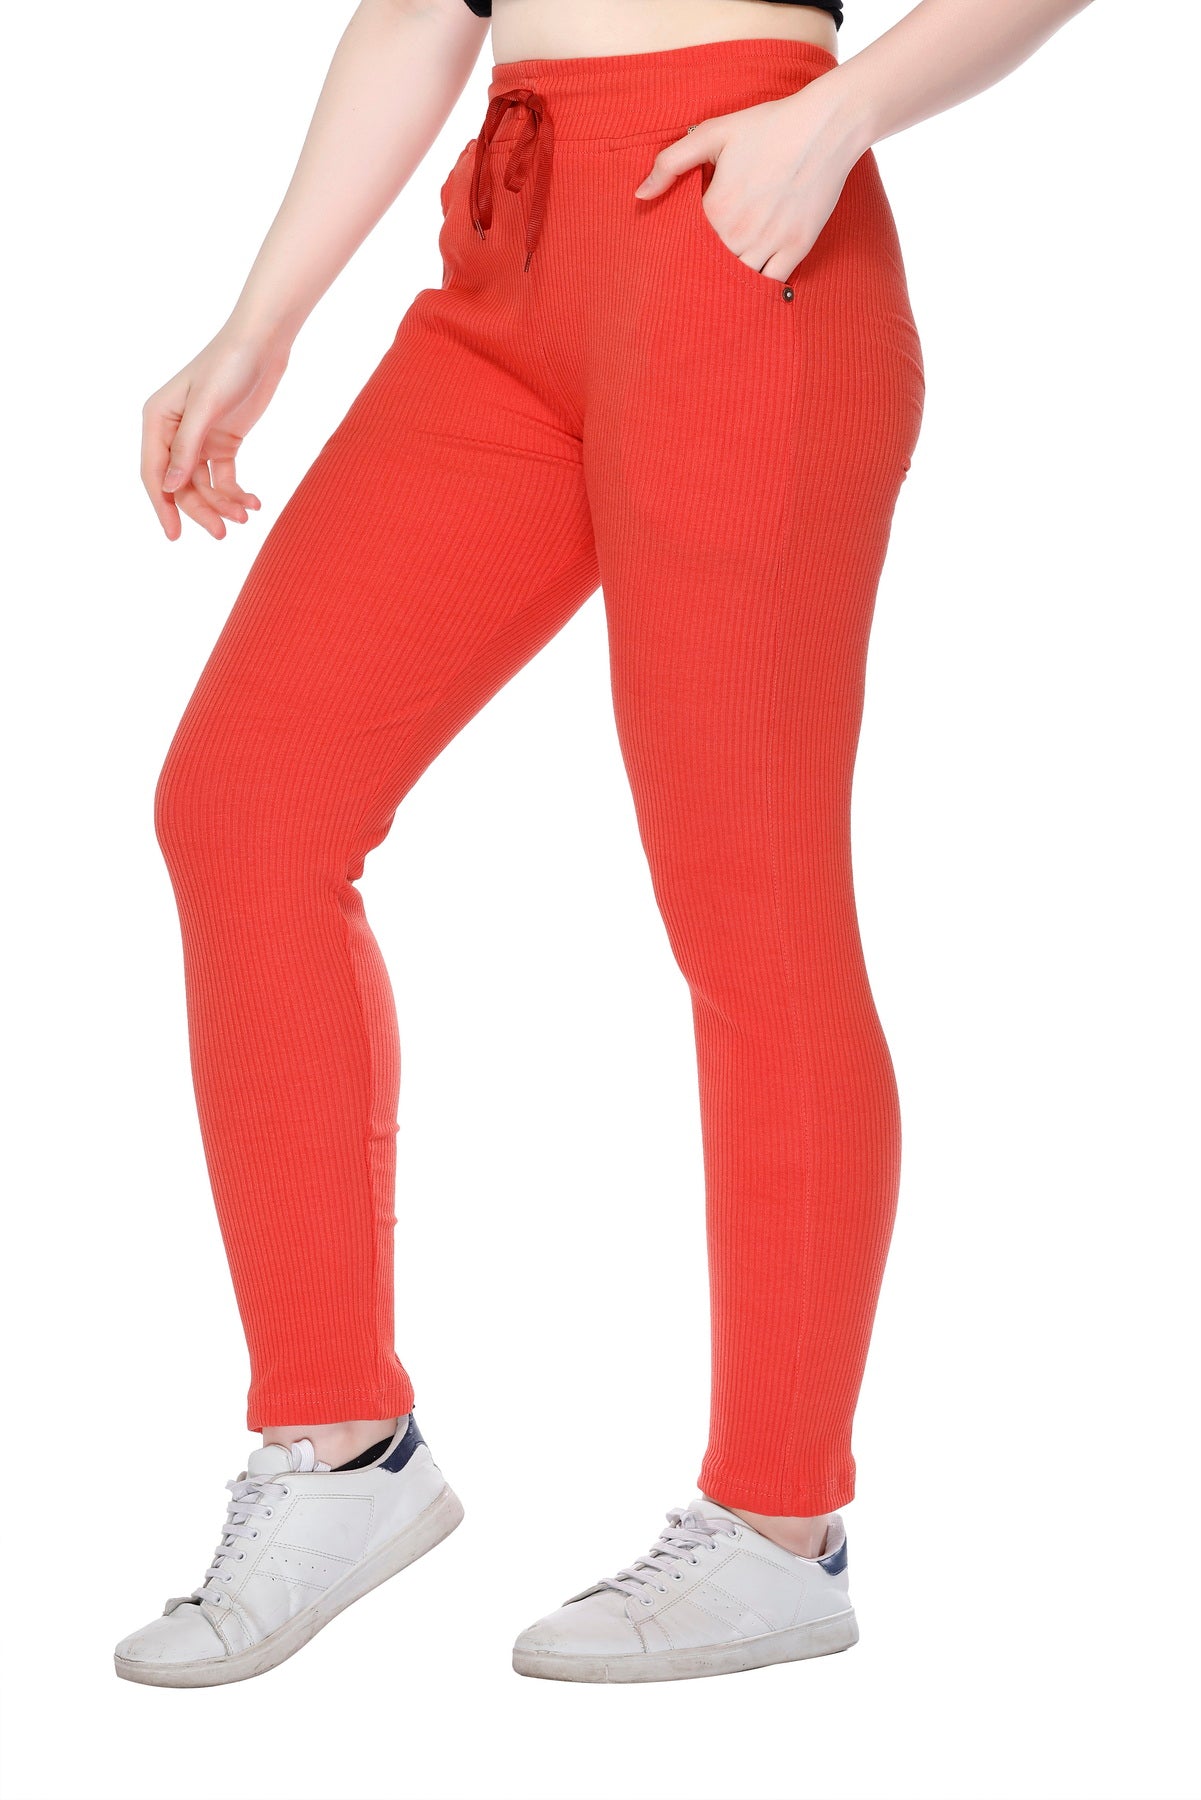 Buy Stretchable Slim Fit Yoga Workout Gym Pants with Pockets